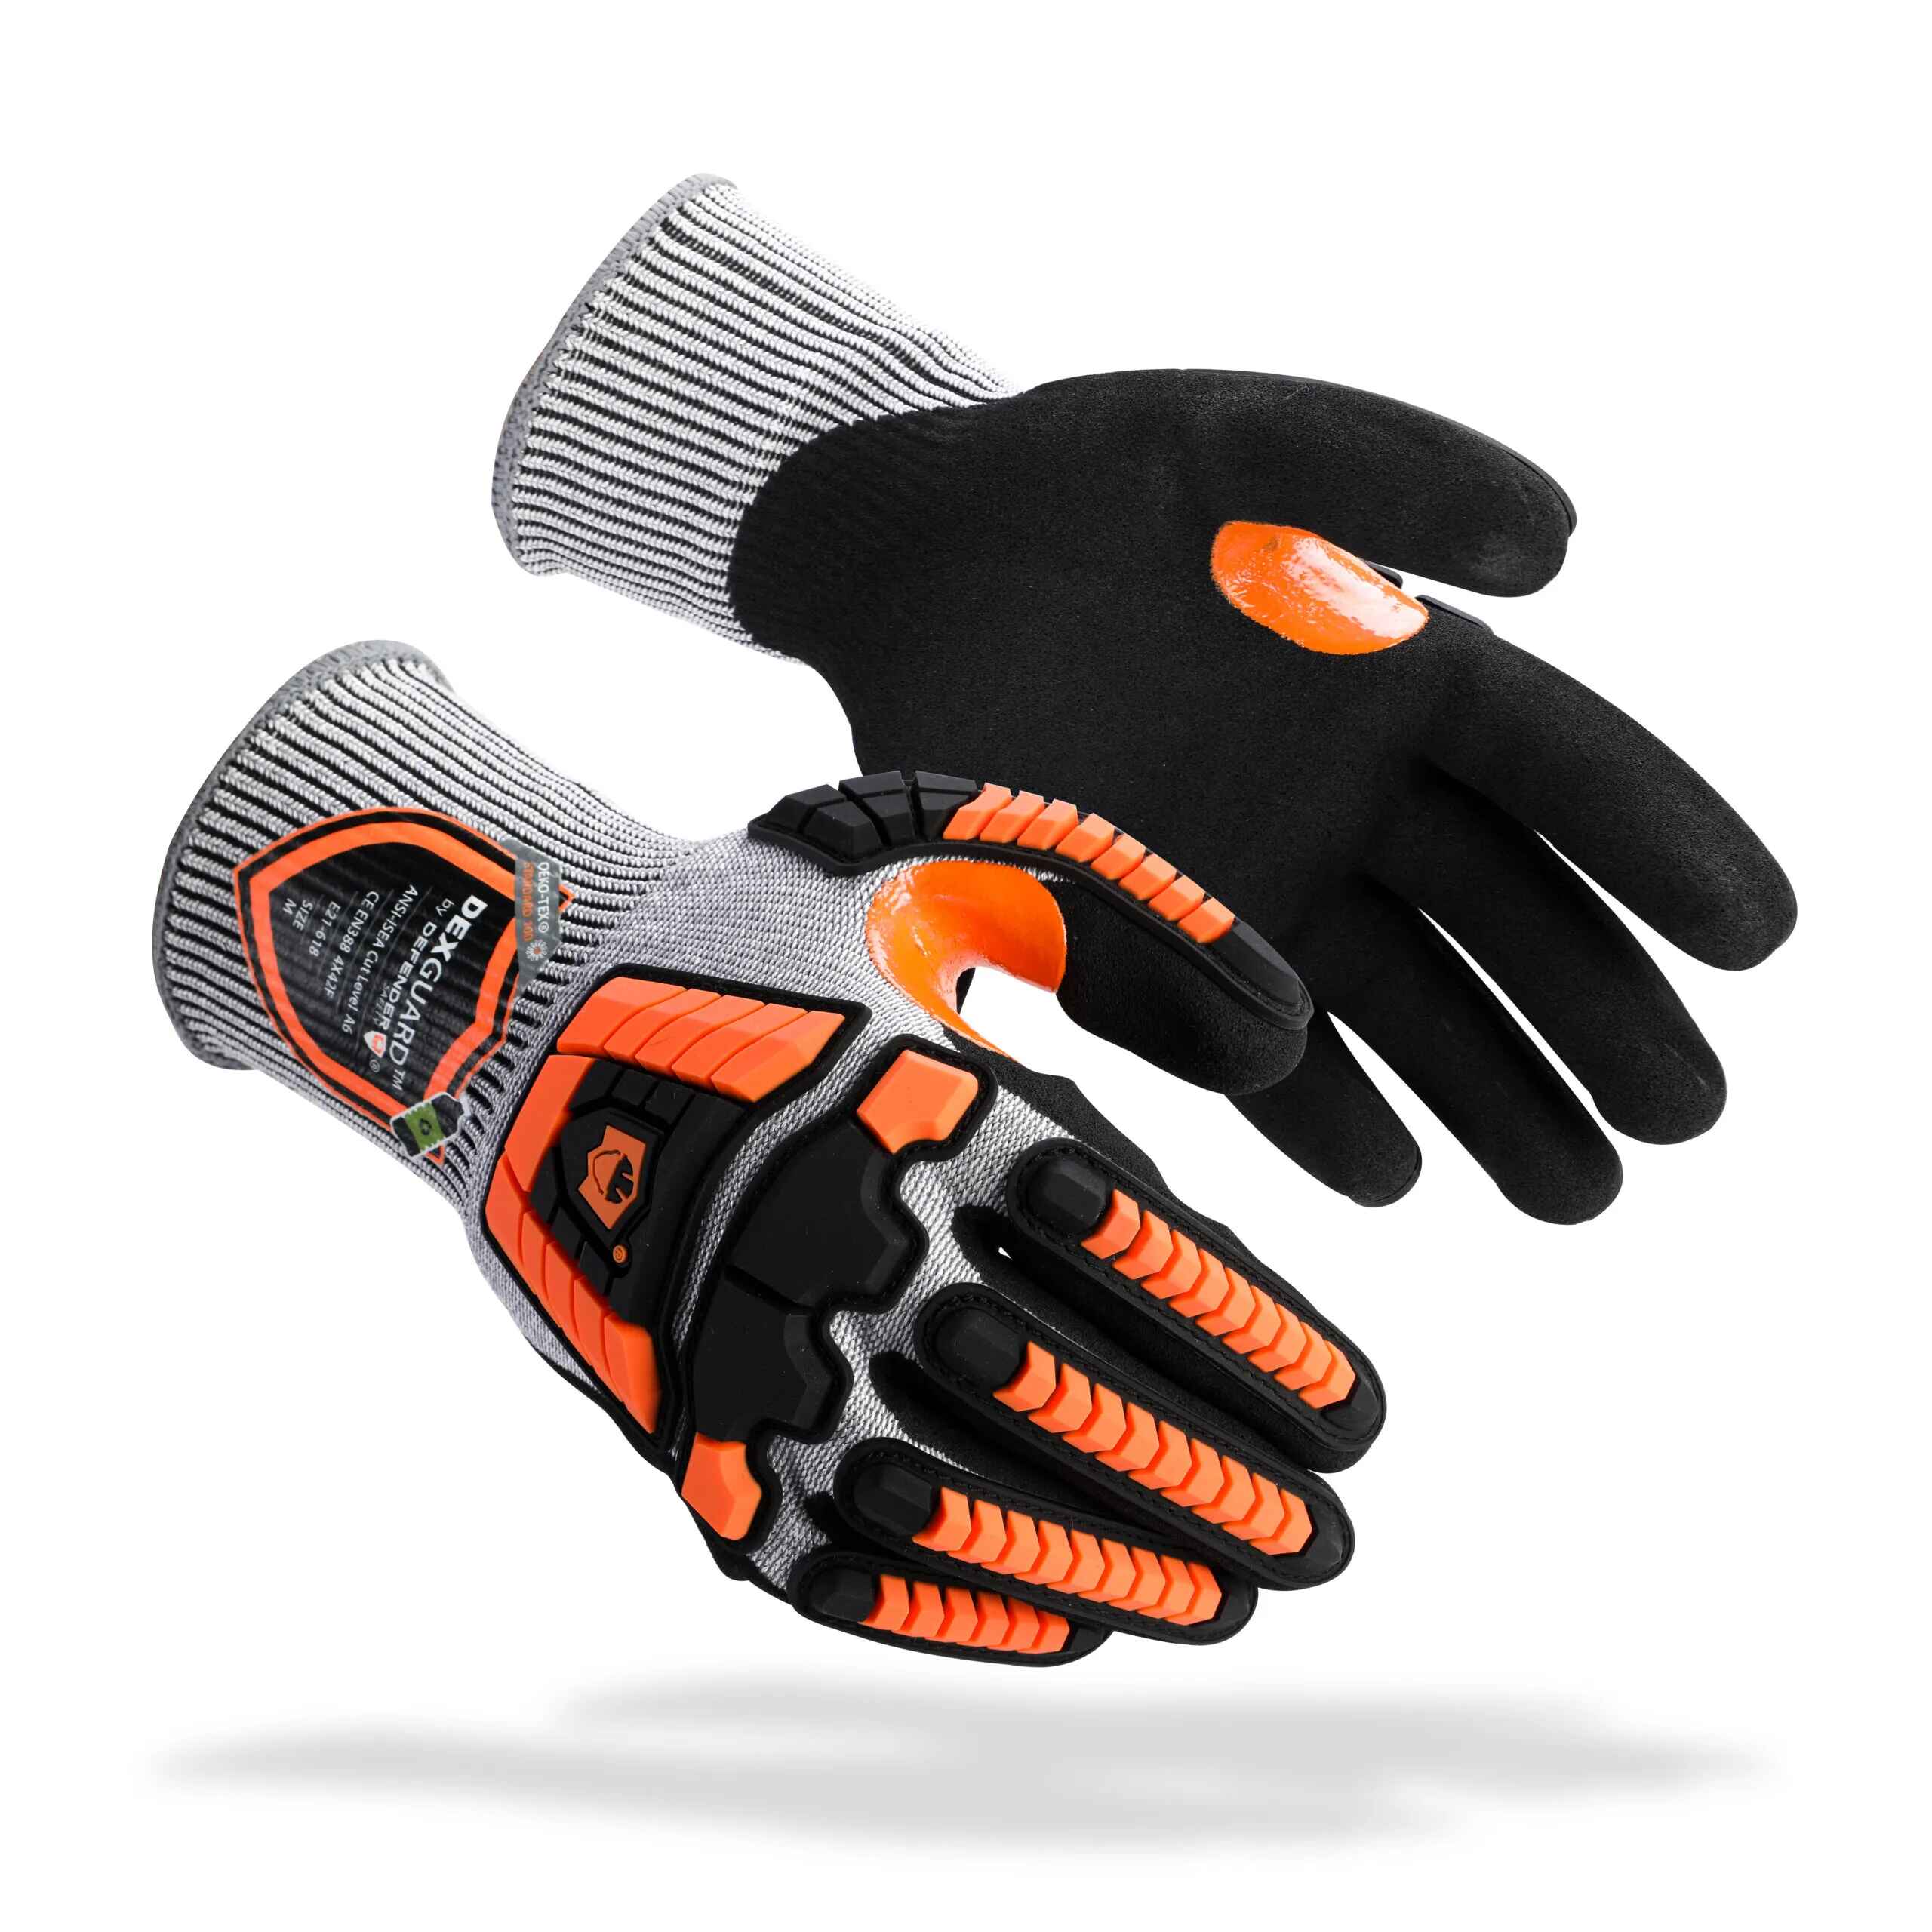 https://defendersafety.com/cdn/shop/products/dexguard-a6-cut-gloves-back-of-the-hand-impact-resistant-level-4-abrasion-resistant-textured-nitrile-coating-679554.jpg?v=1690825176&width=2560